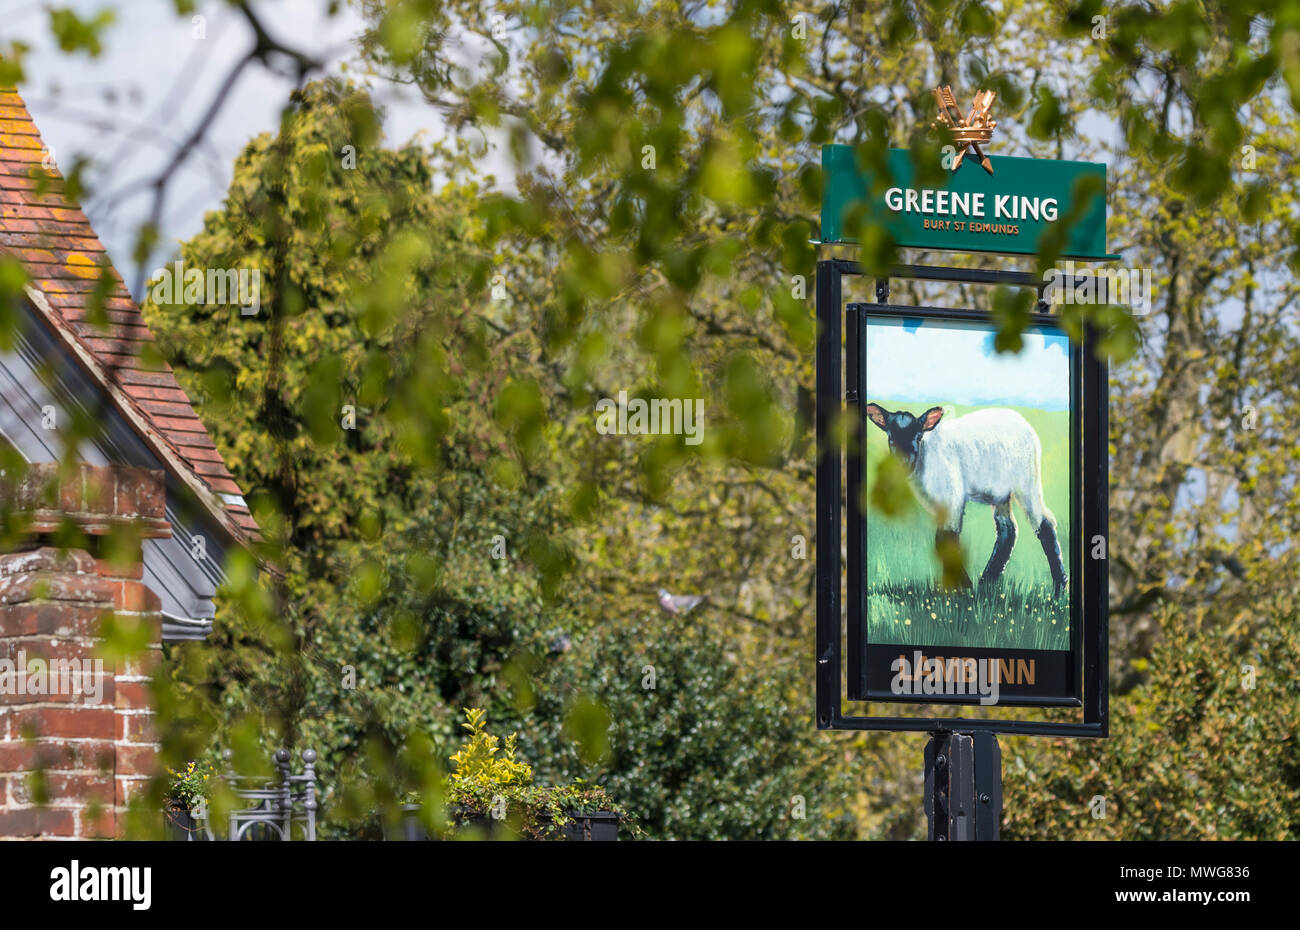 Sign for the Lamb Inn pub in the UK, one of the Greene King branches of public house. British pub sign. Stock Photo